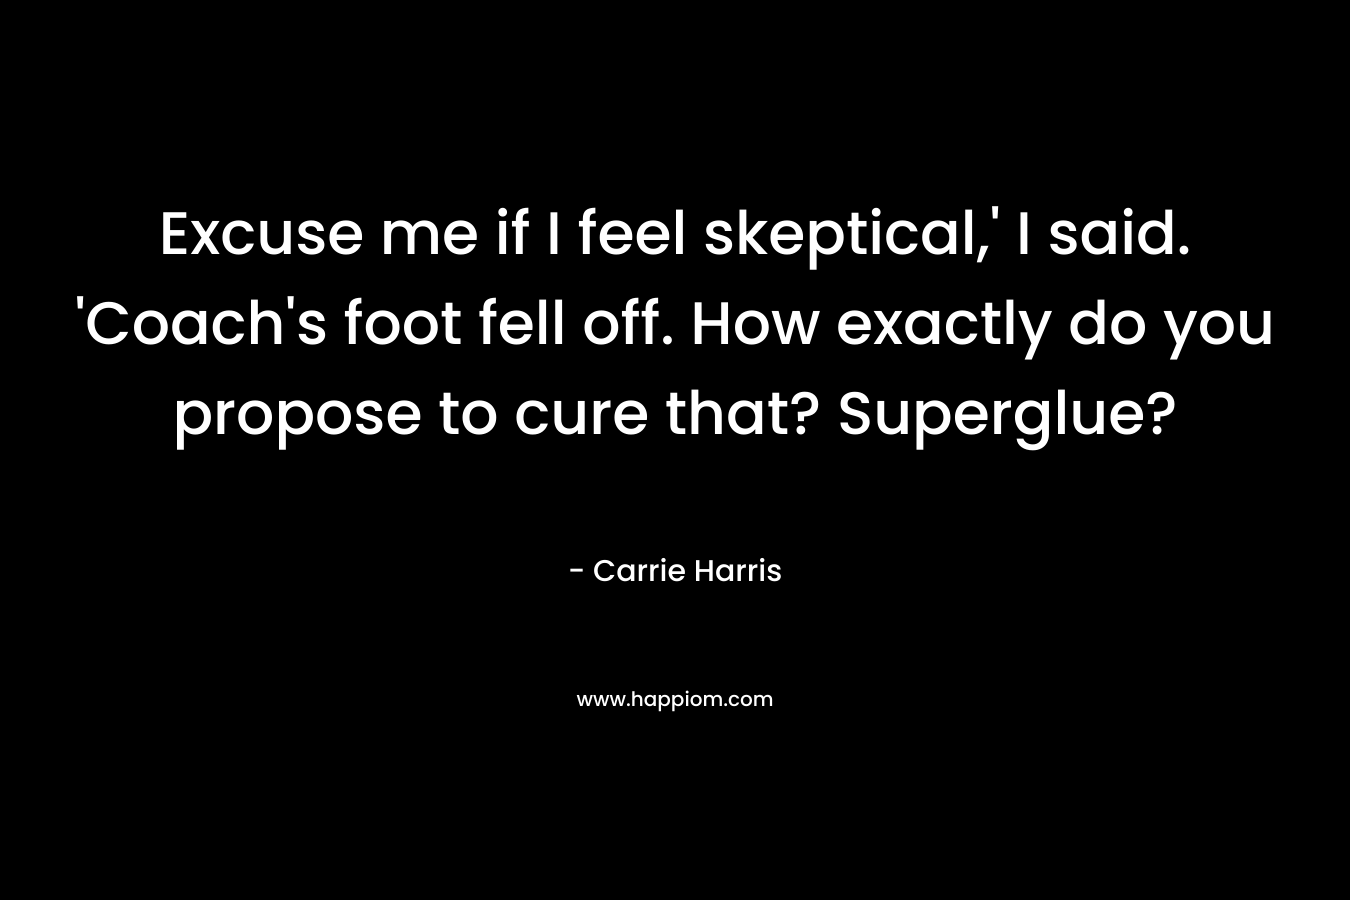 Excuse me if I feel skeptical,’ I said. ‘Coach’s foot fell off. How exactly do you propose to cure that? Superglue? – Carrie Harris